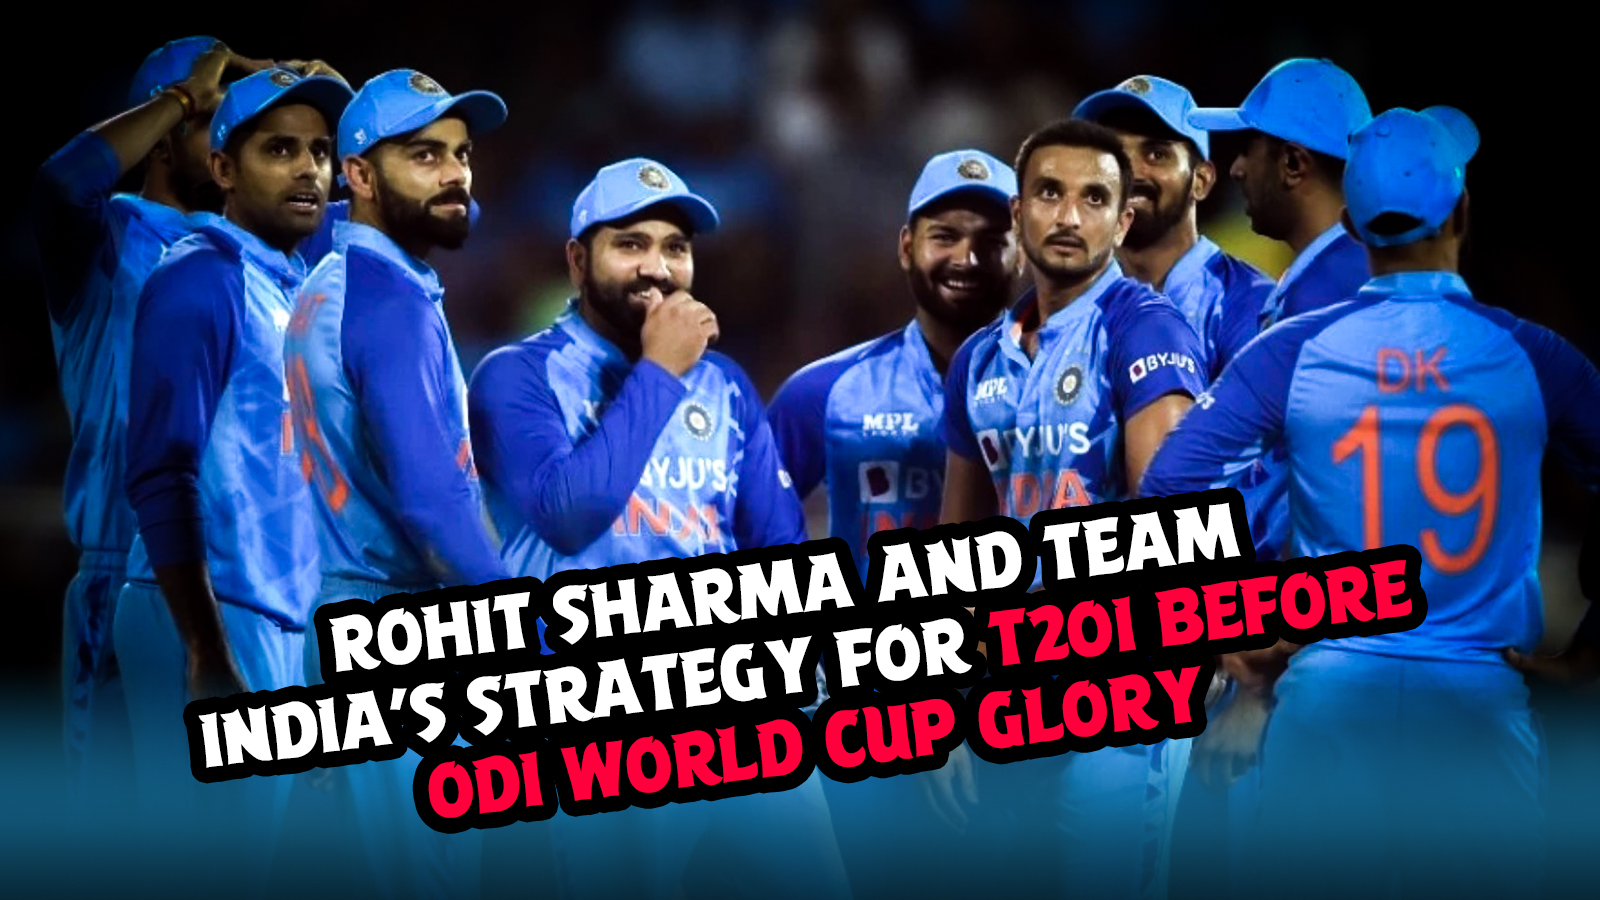 Rohit Sharma Unveils T20I Strategy: Elevating Workload for ODI World Cup Glory